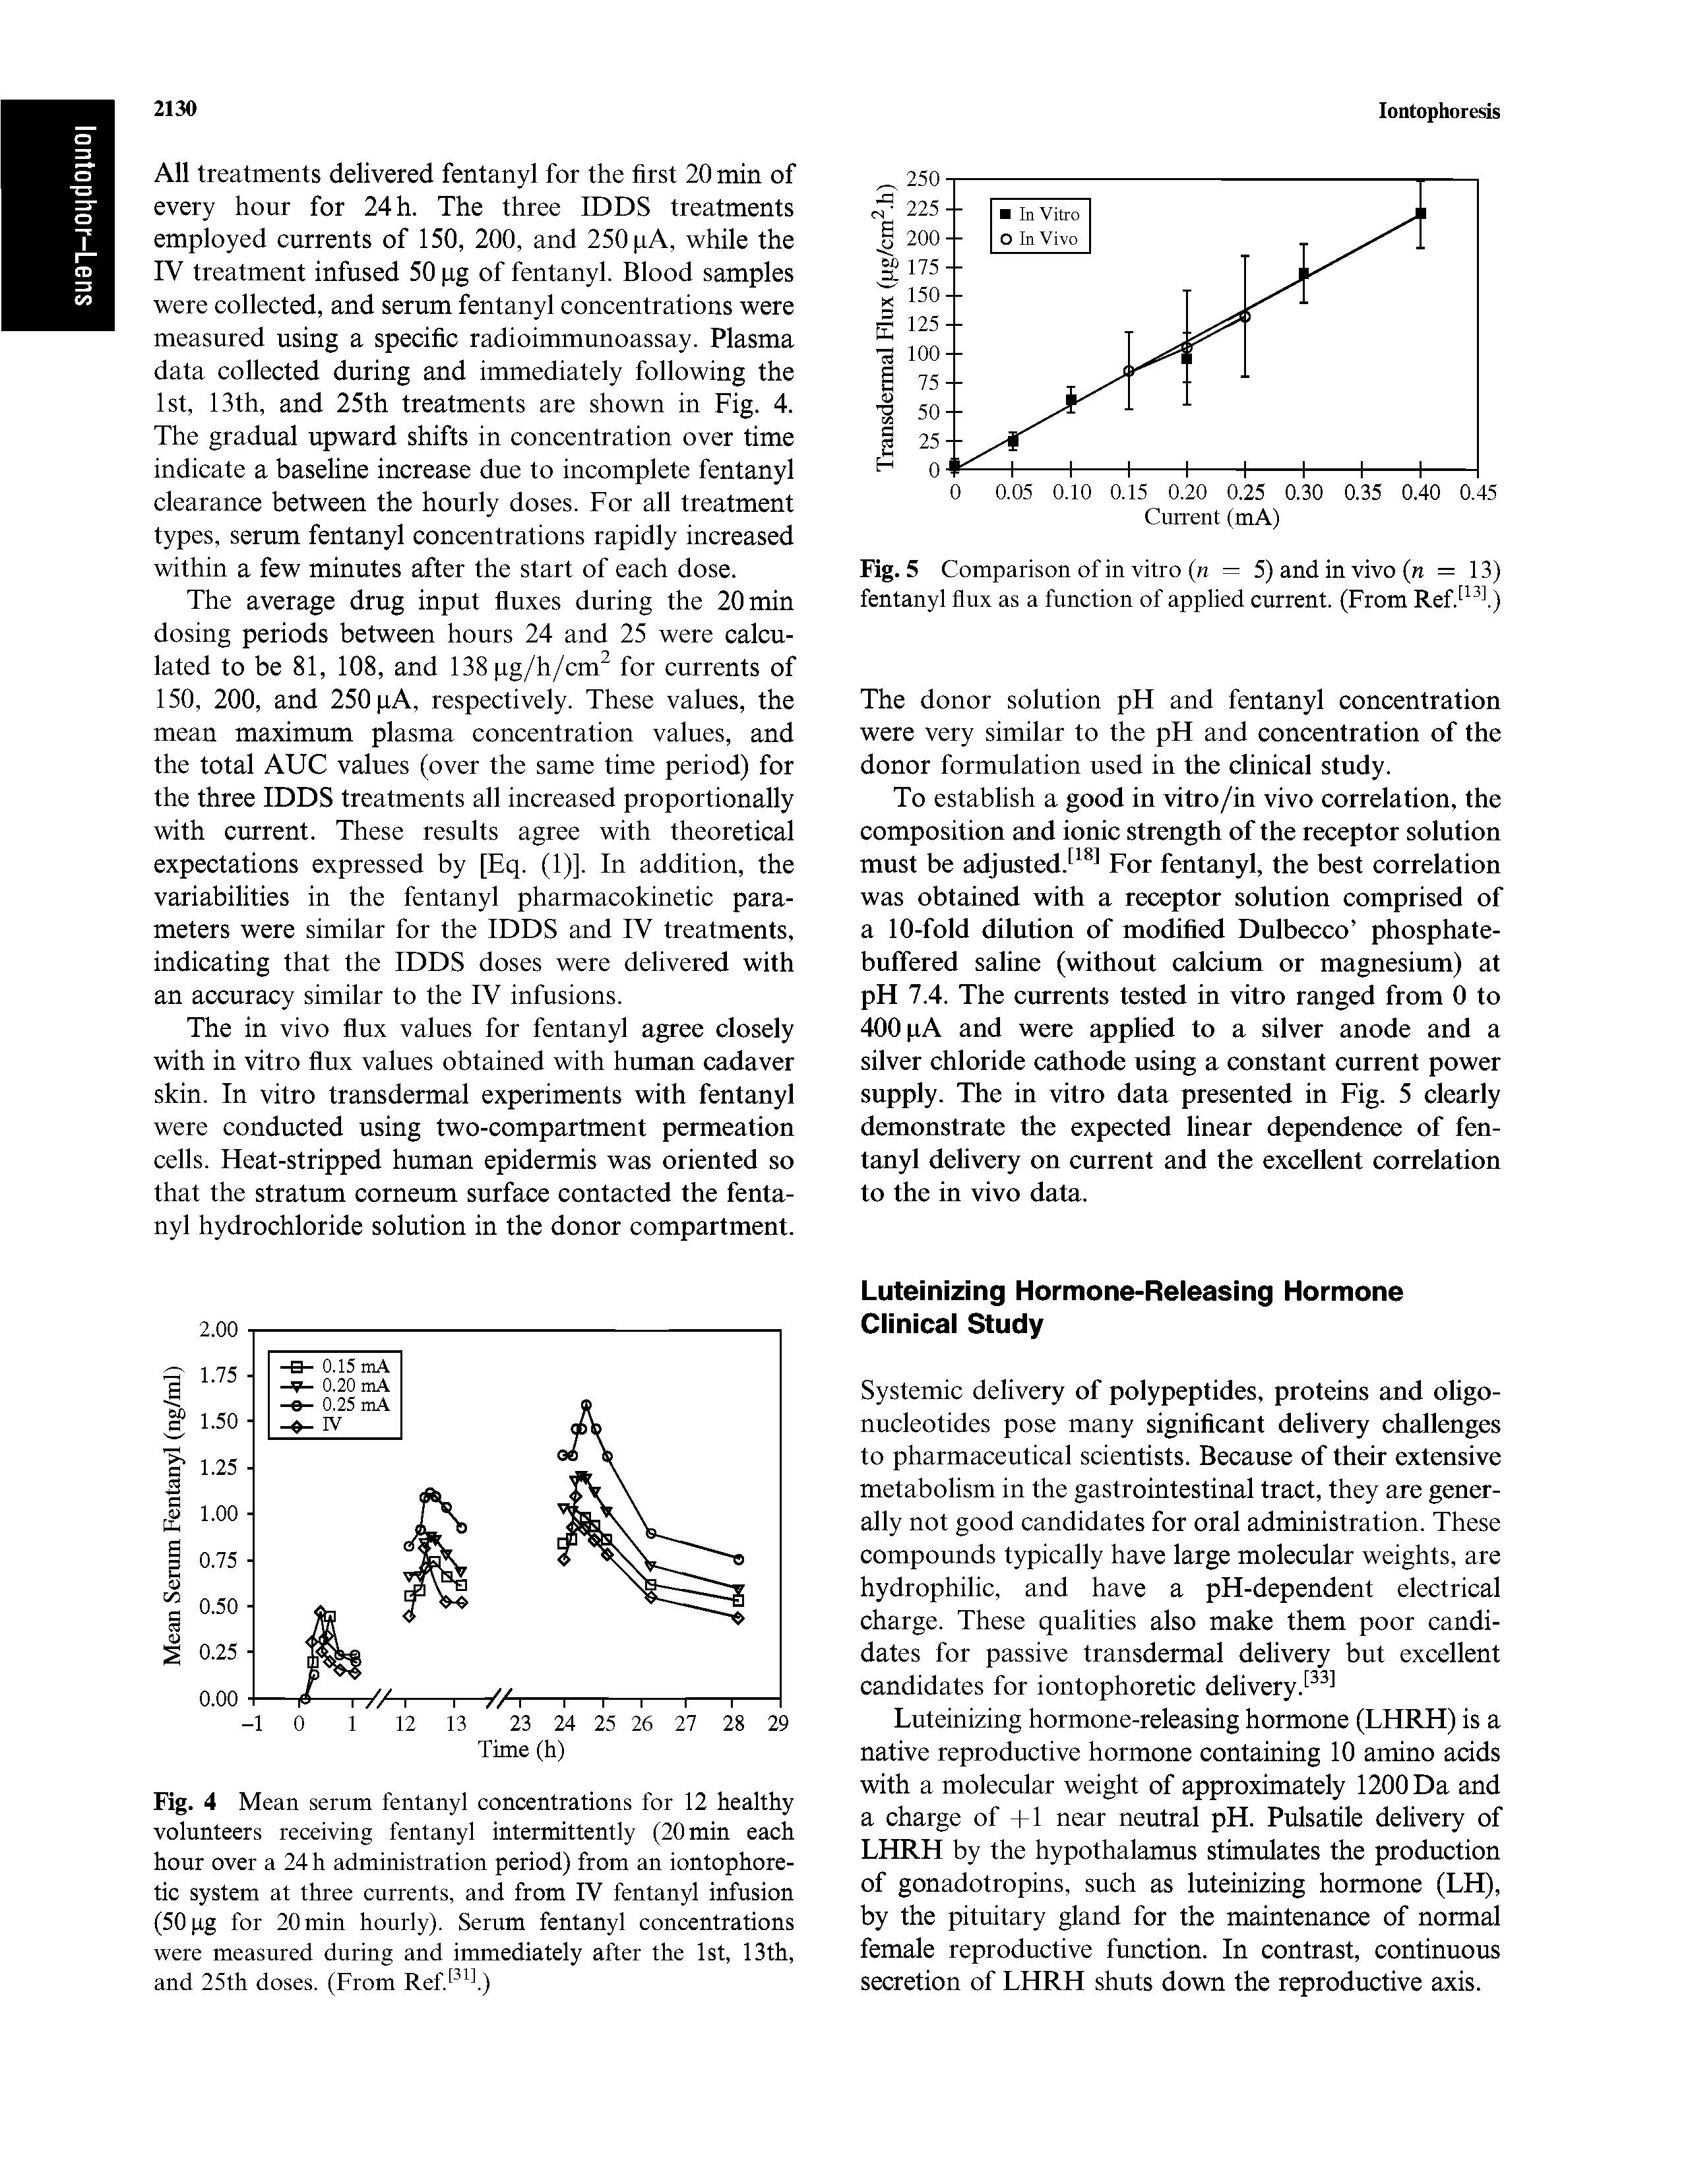 Fig. 4 Mean serum fentanyl concentrations for 12 healthy volunteers receiving fentanyl intermittently (20 min each hour over a 24 h administration period) from an iontophore-tic system at three currents, and from IV fentanyl infusion (50 pg for 20 min hourly). Serum fentanyl concentrations were measured during and immediately after the 1st, 13th, and 25th doses. (From Ref. l)...